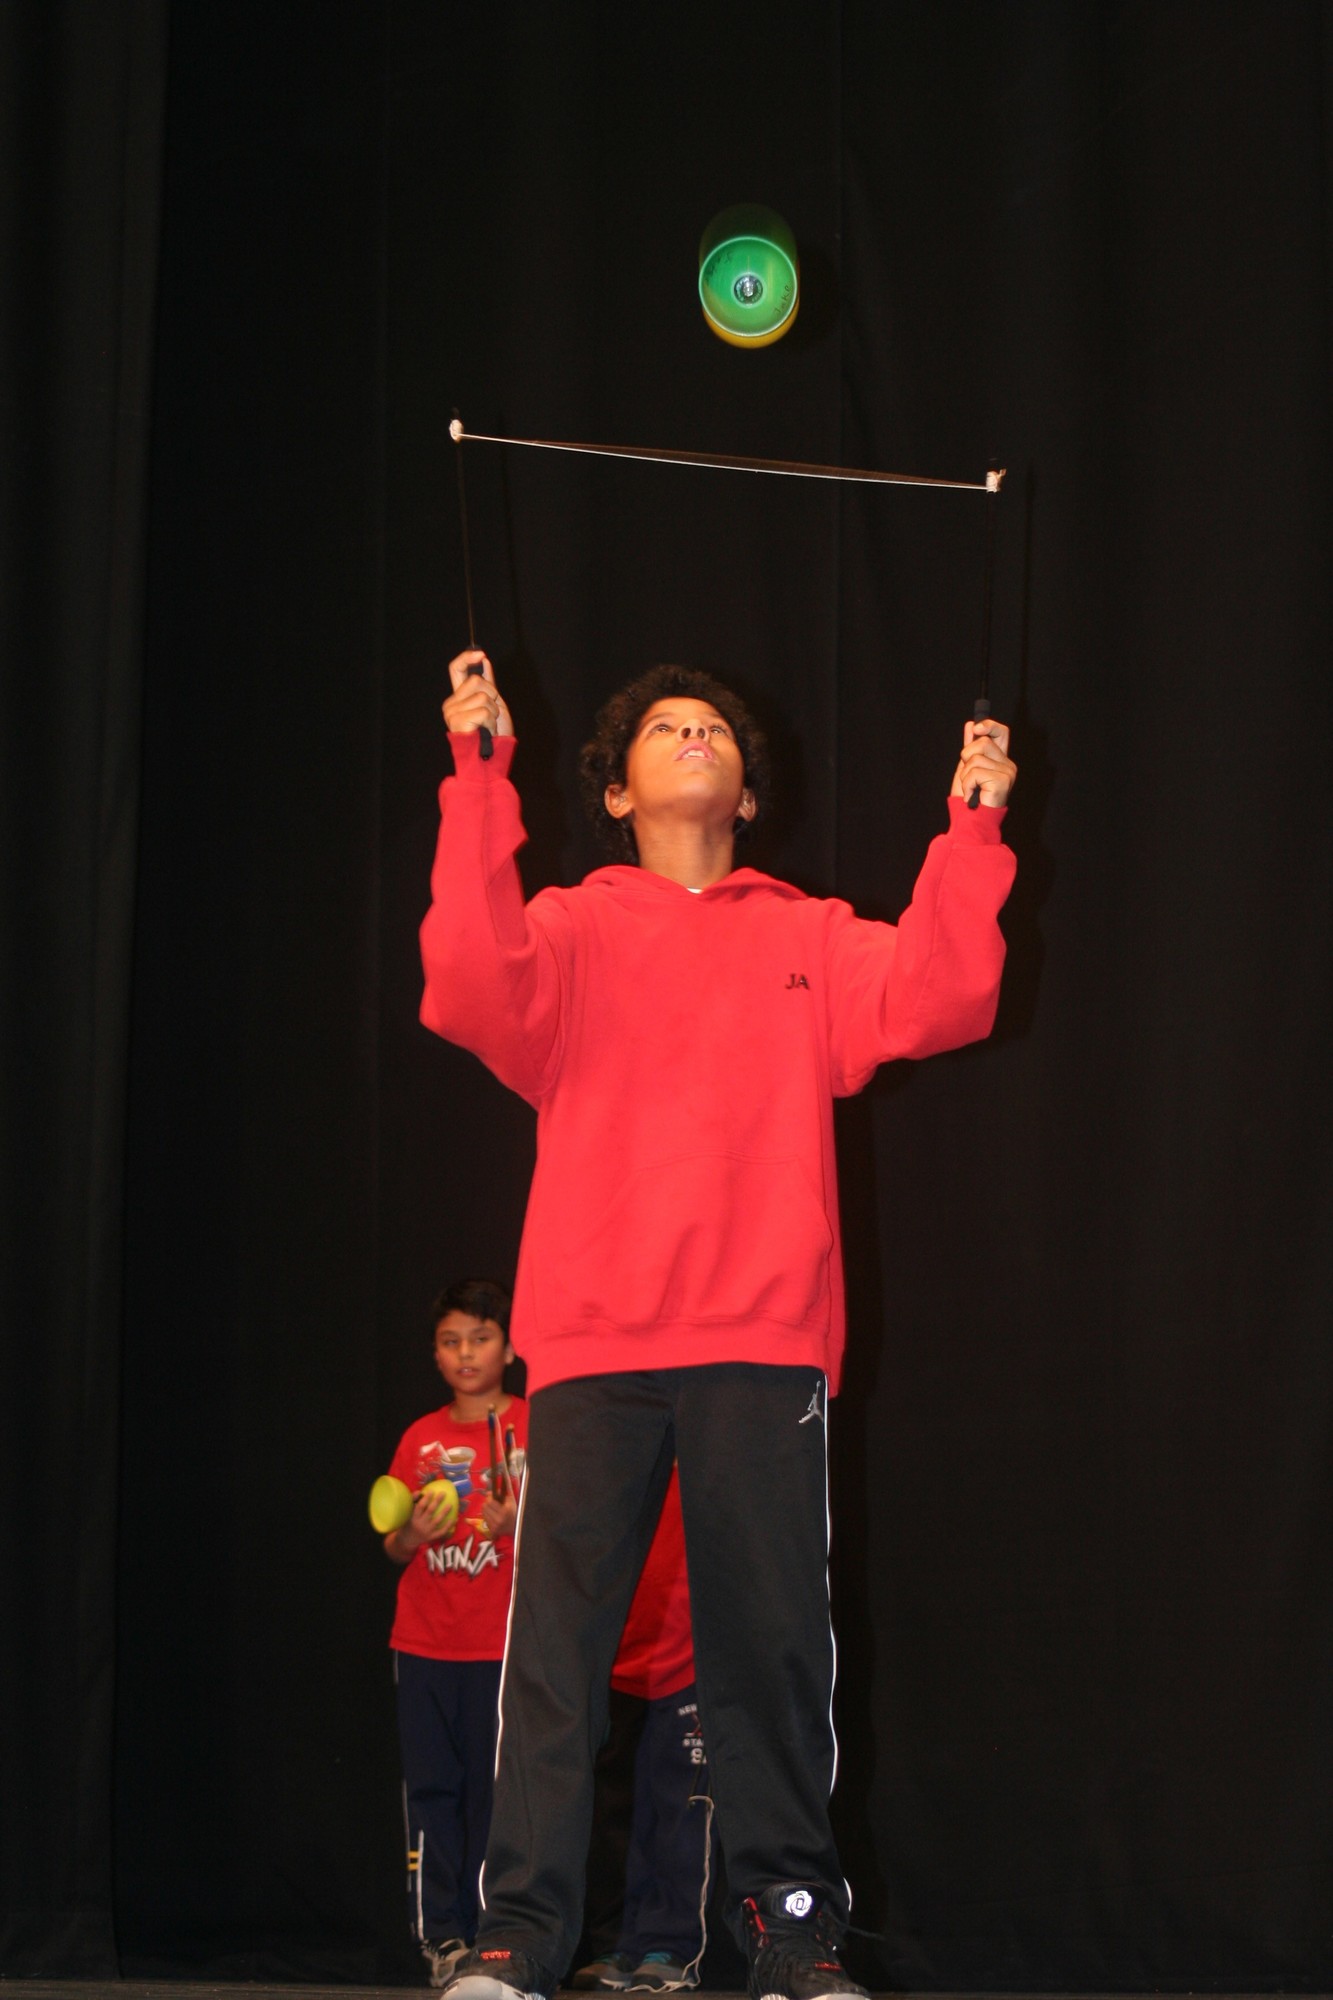 Jake Yuhas wowed the audience with his skill with the Chinese yo-yo.